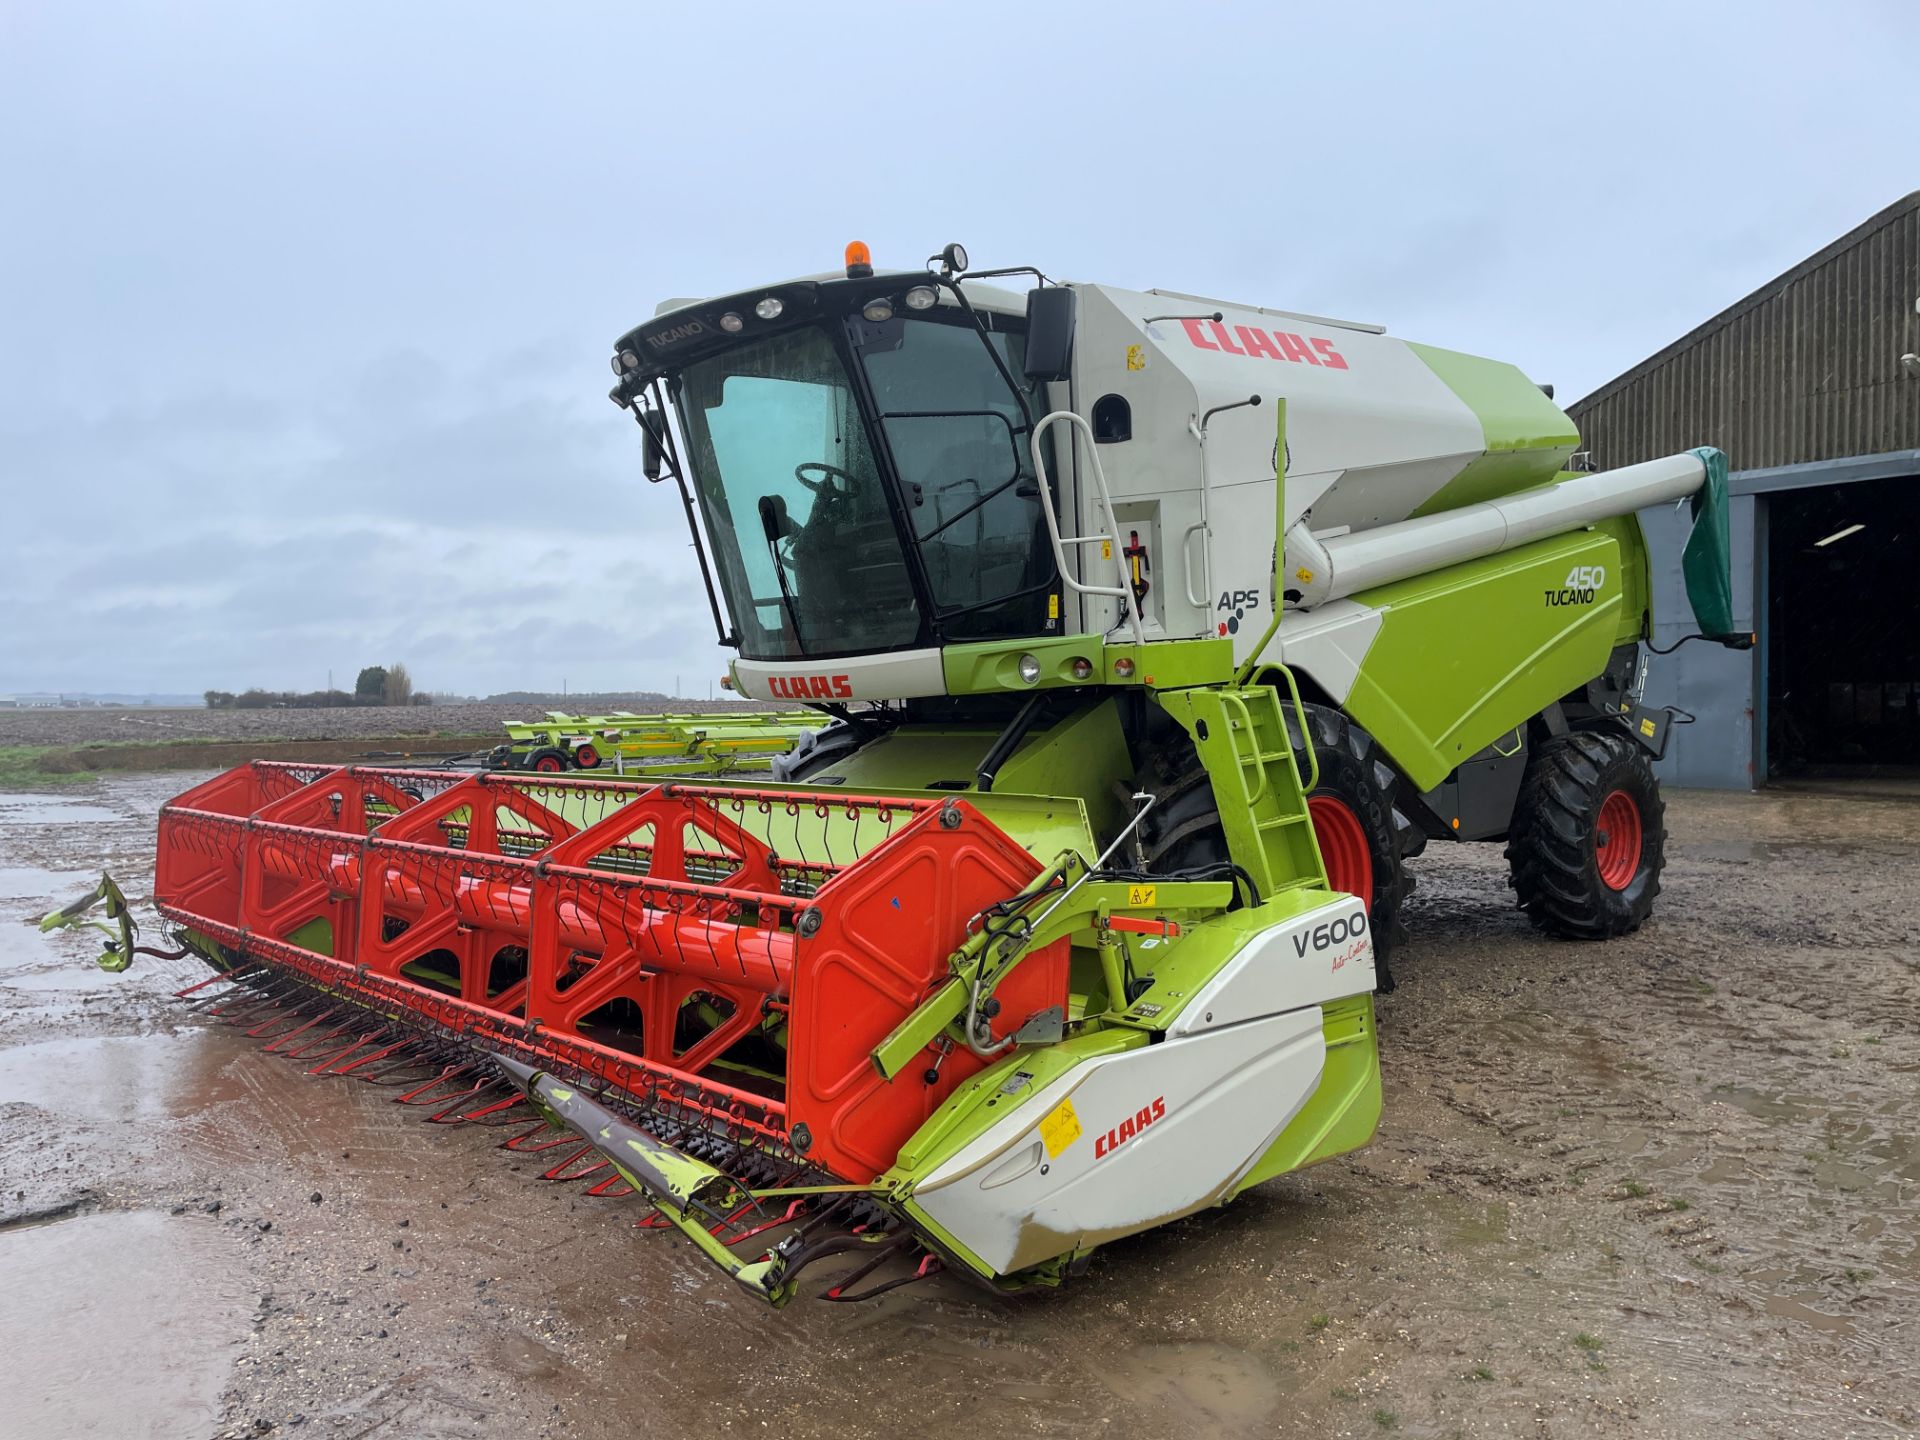 (08) Claas Tucano 450 combine harvester V600 6m Auto Contour cutterbar with trolley, APS Hybrid - Image 2 of 3